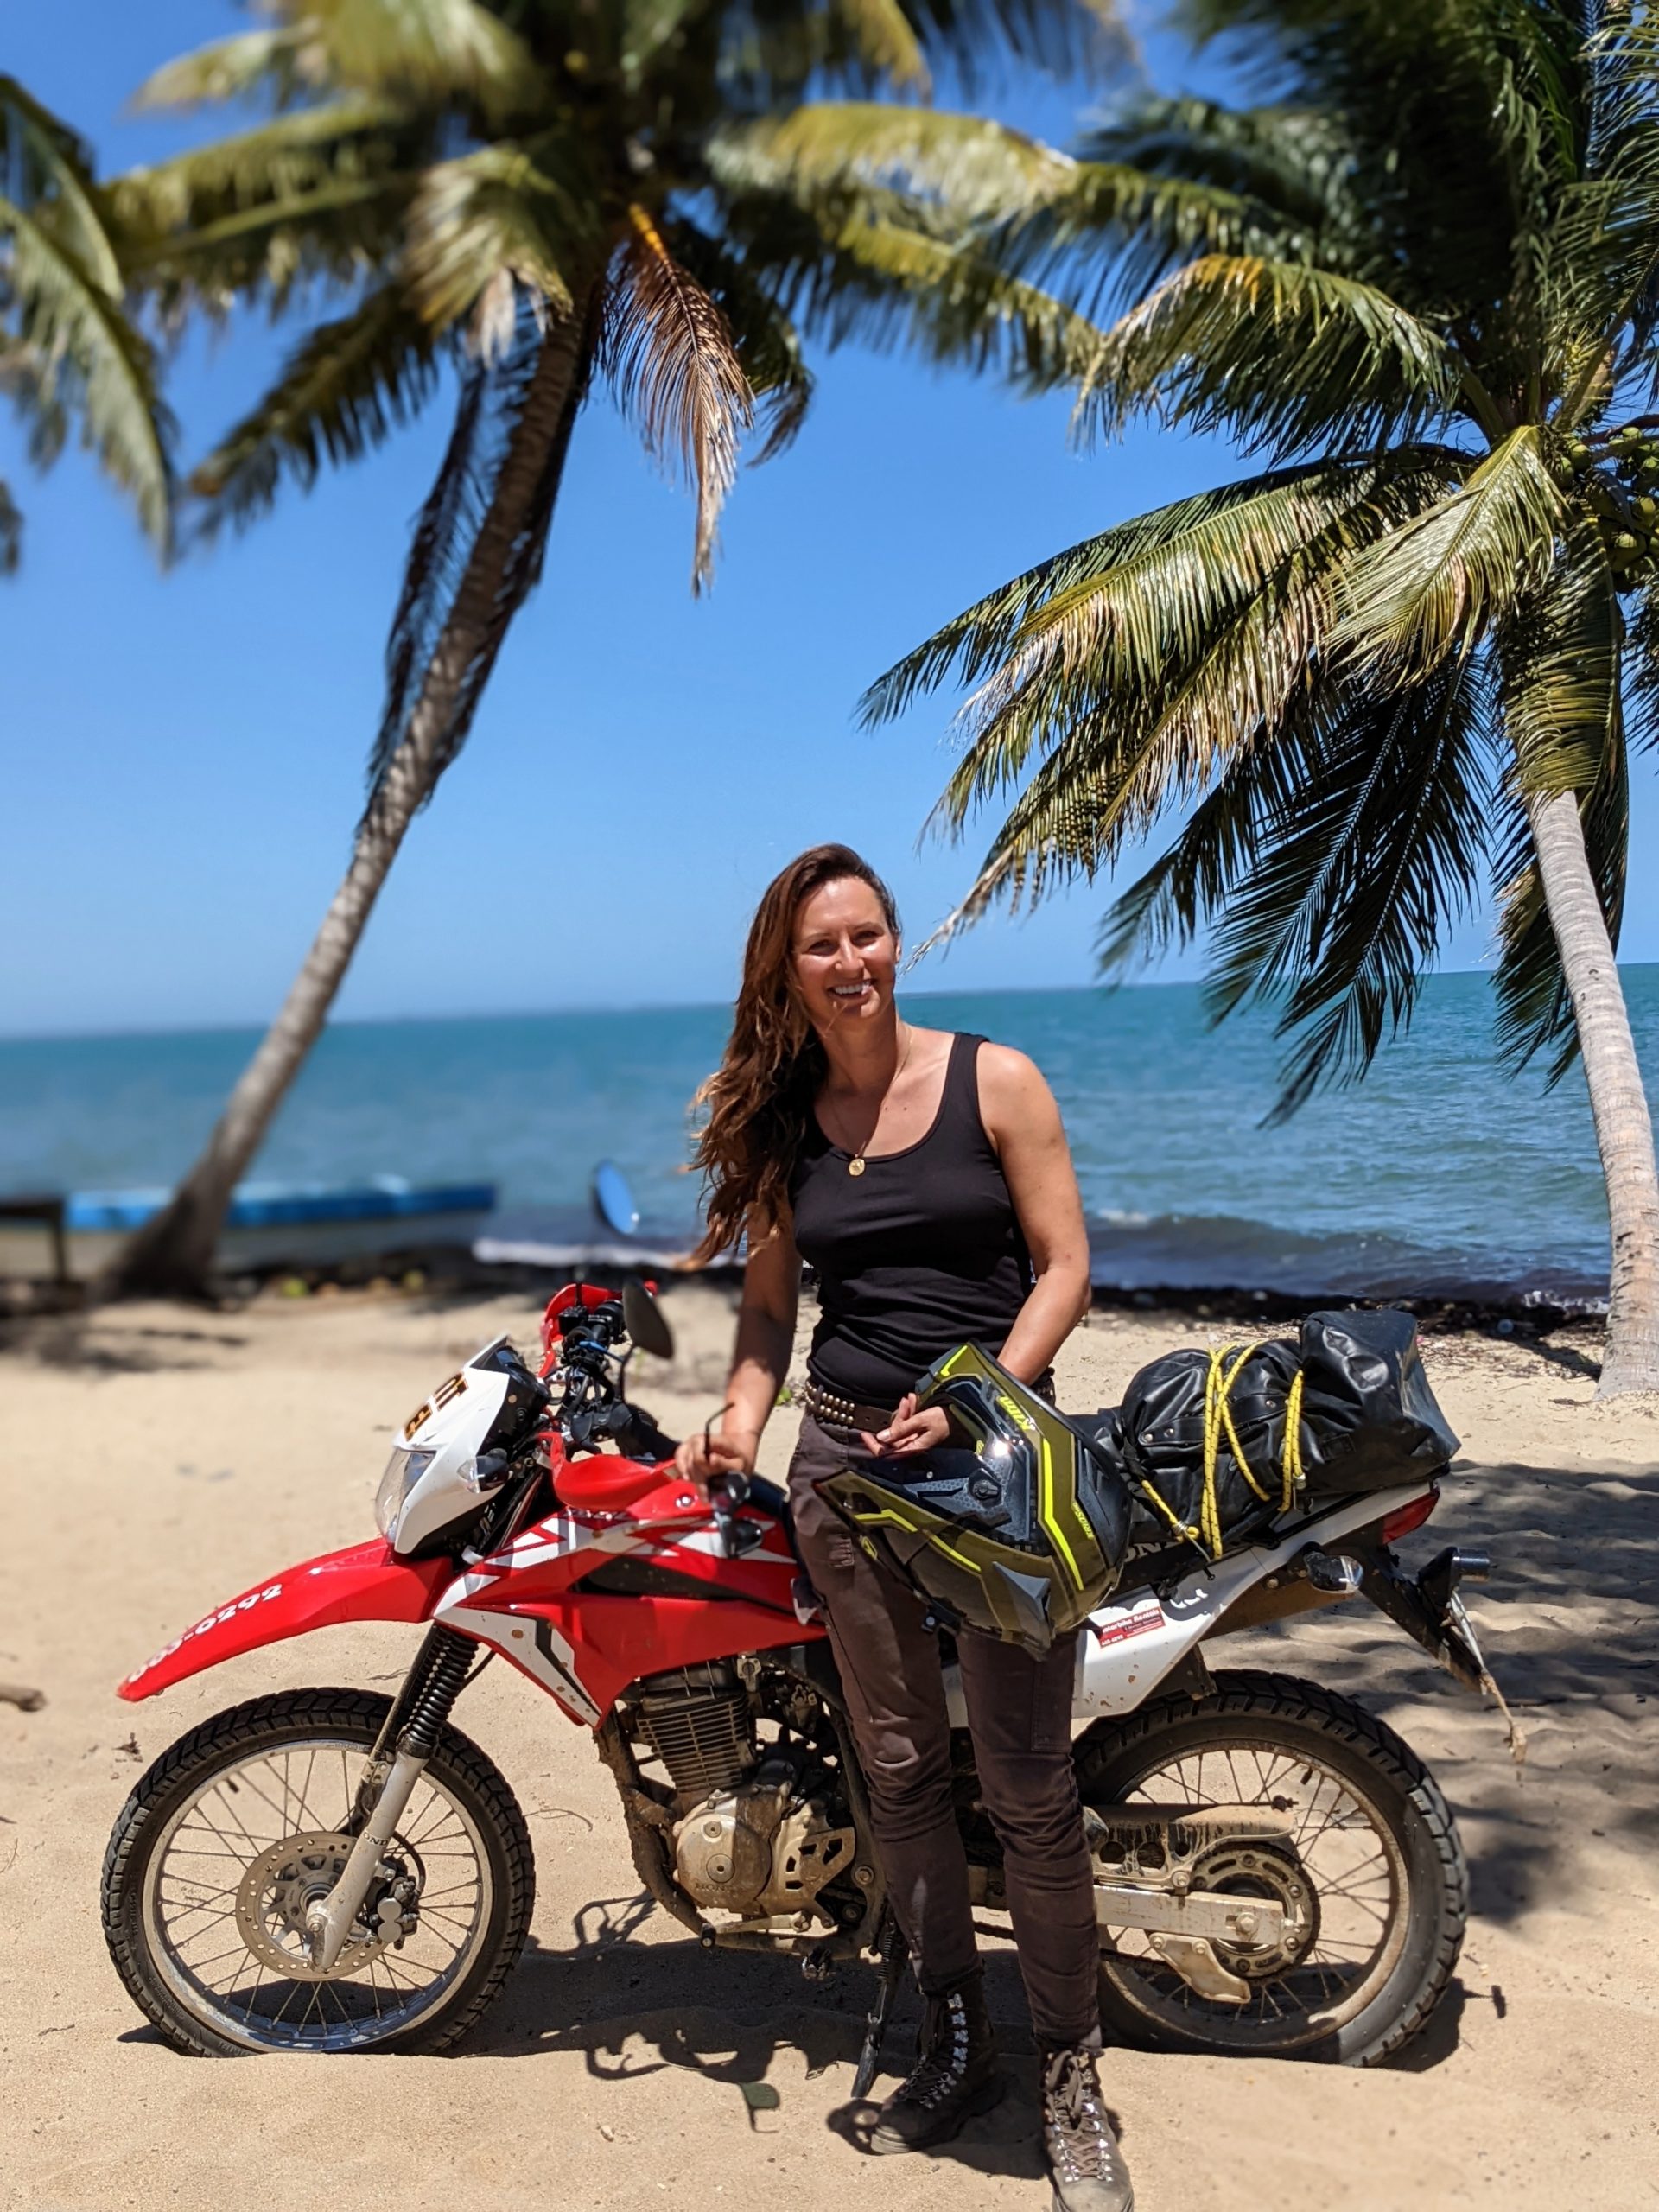 Women's Motorcycle Tours: Adventure and Dirt // Big Little Rides